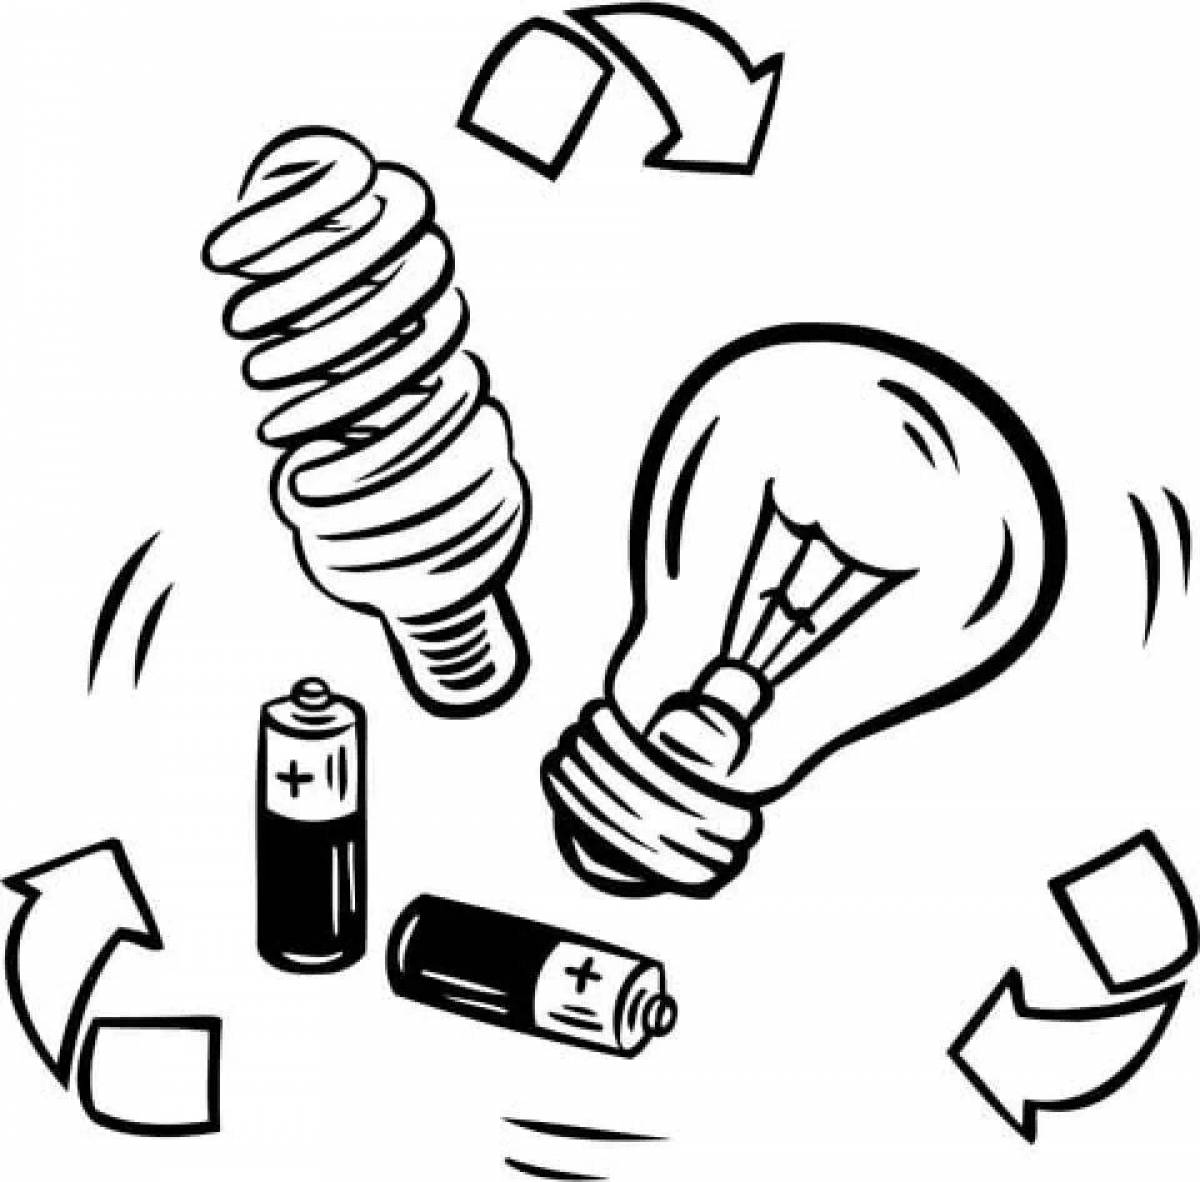 Coloring page happy electricity for kids